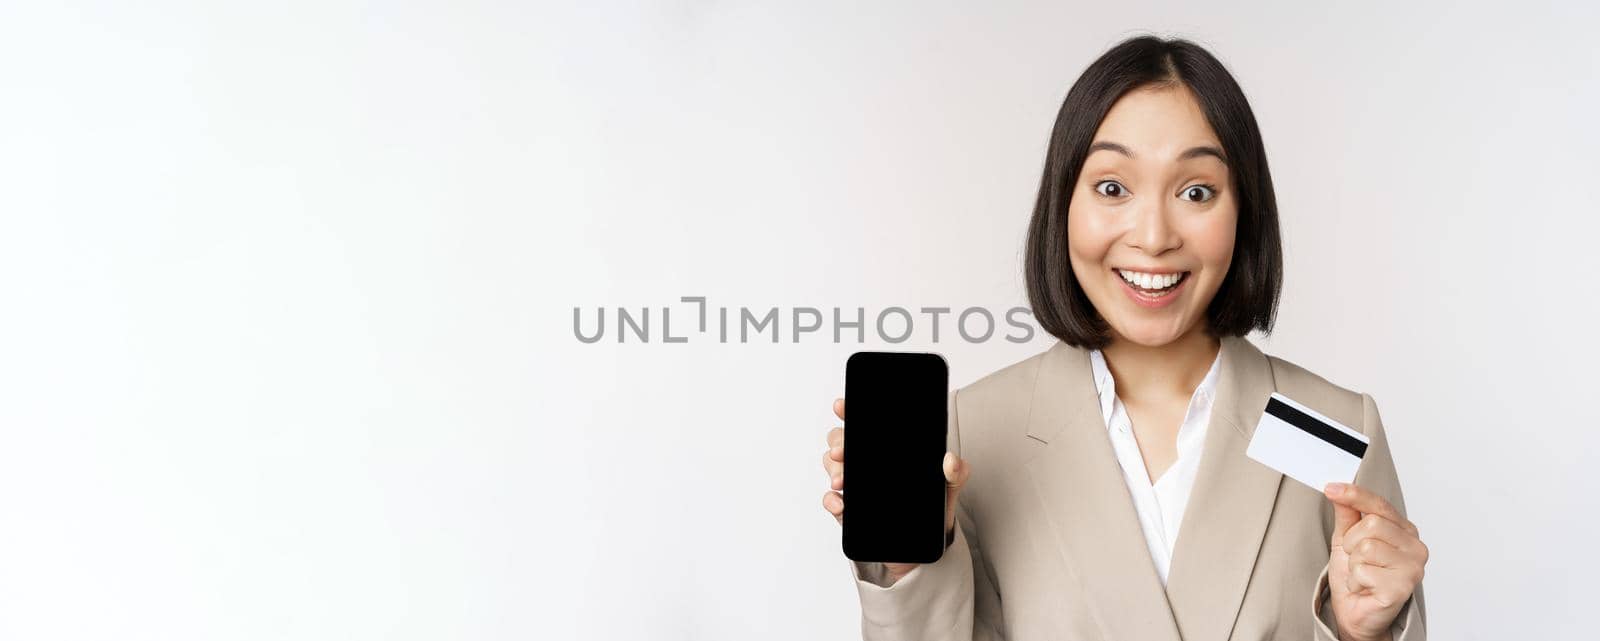 Corporate woman with happy, enthusiastic face, showing credit card and smartphone app screen, standing in suit over white background.